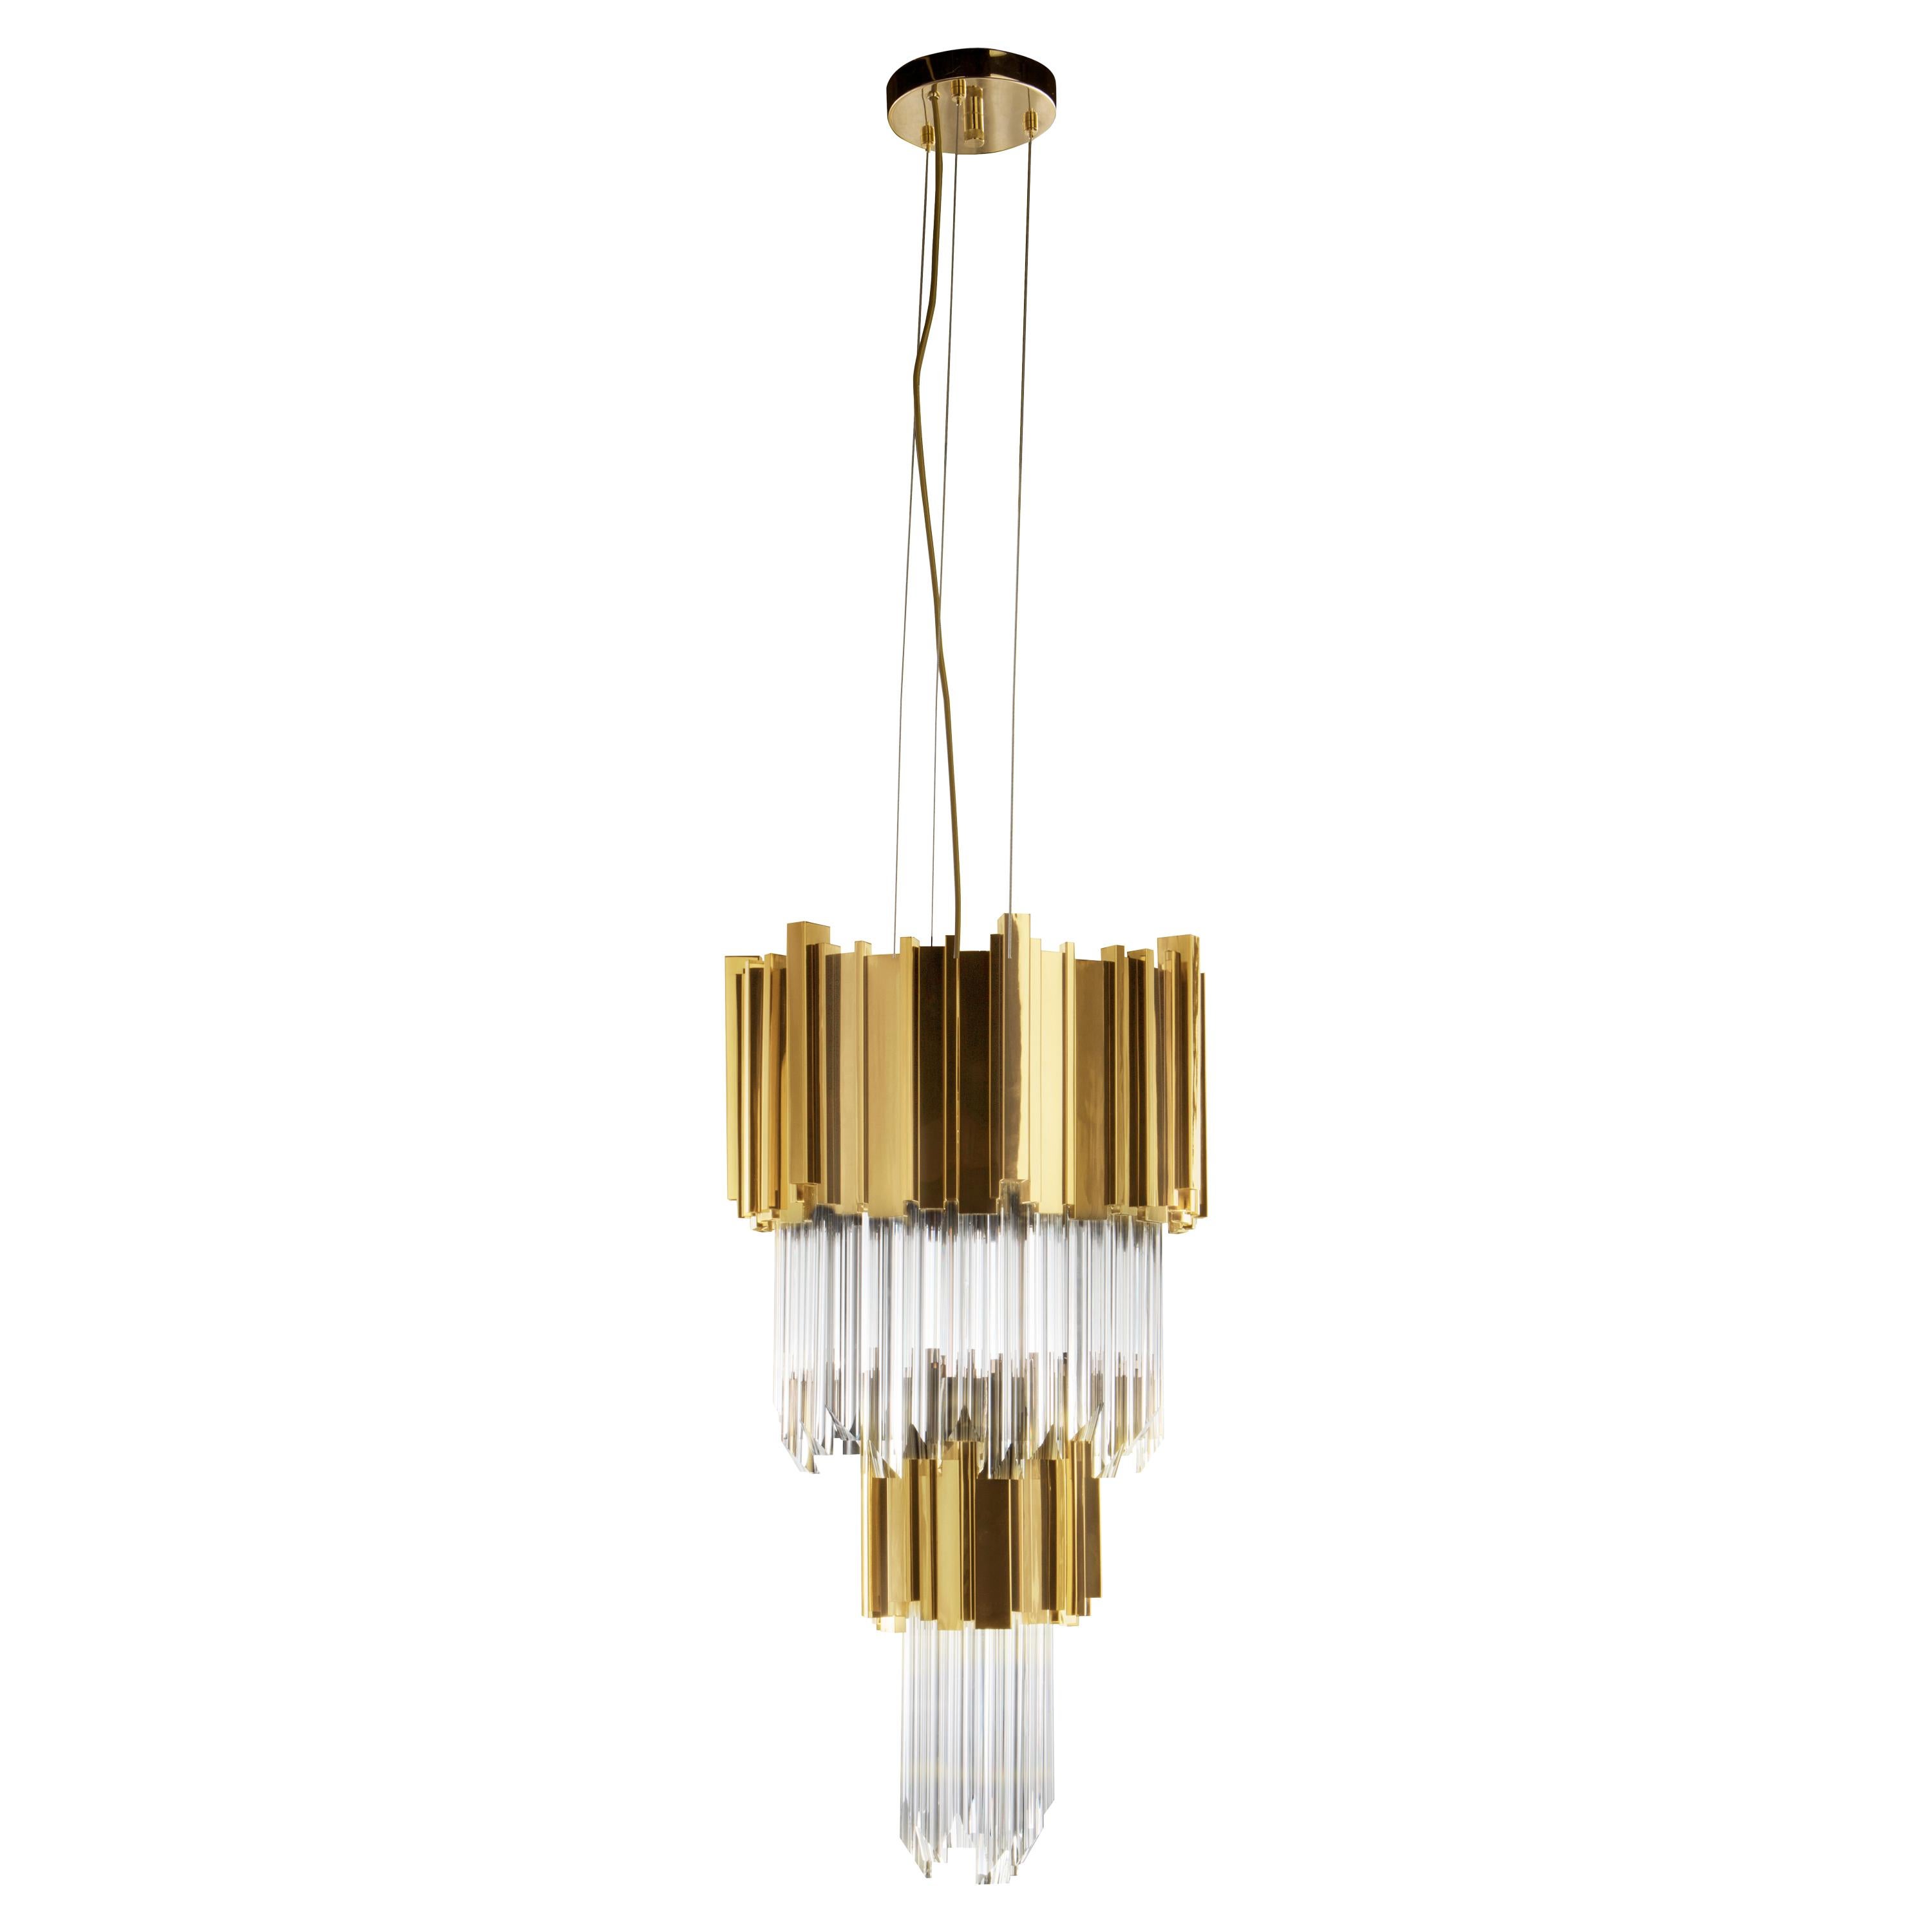 Luxxu Empire Pendant Light in Brass with Crystal Glass Details For Sale